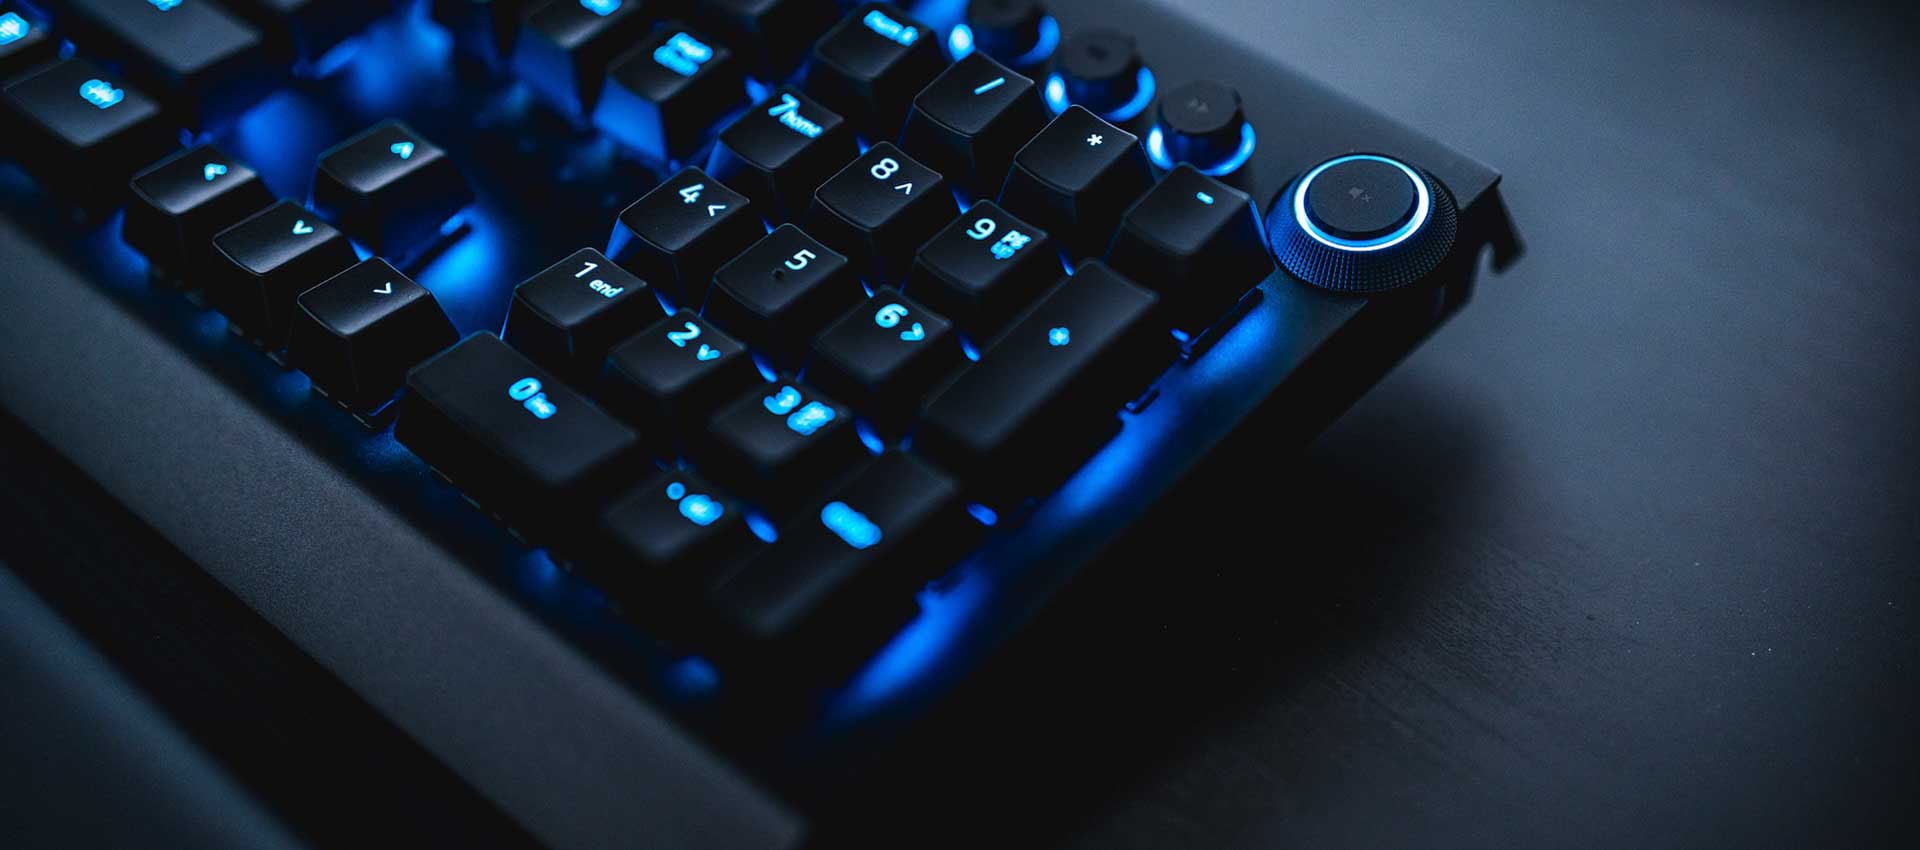 Top 17 Mechanical Keyboard For Gaming 2020 Available In Pakistan